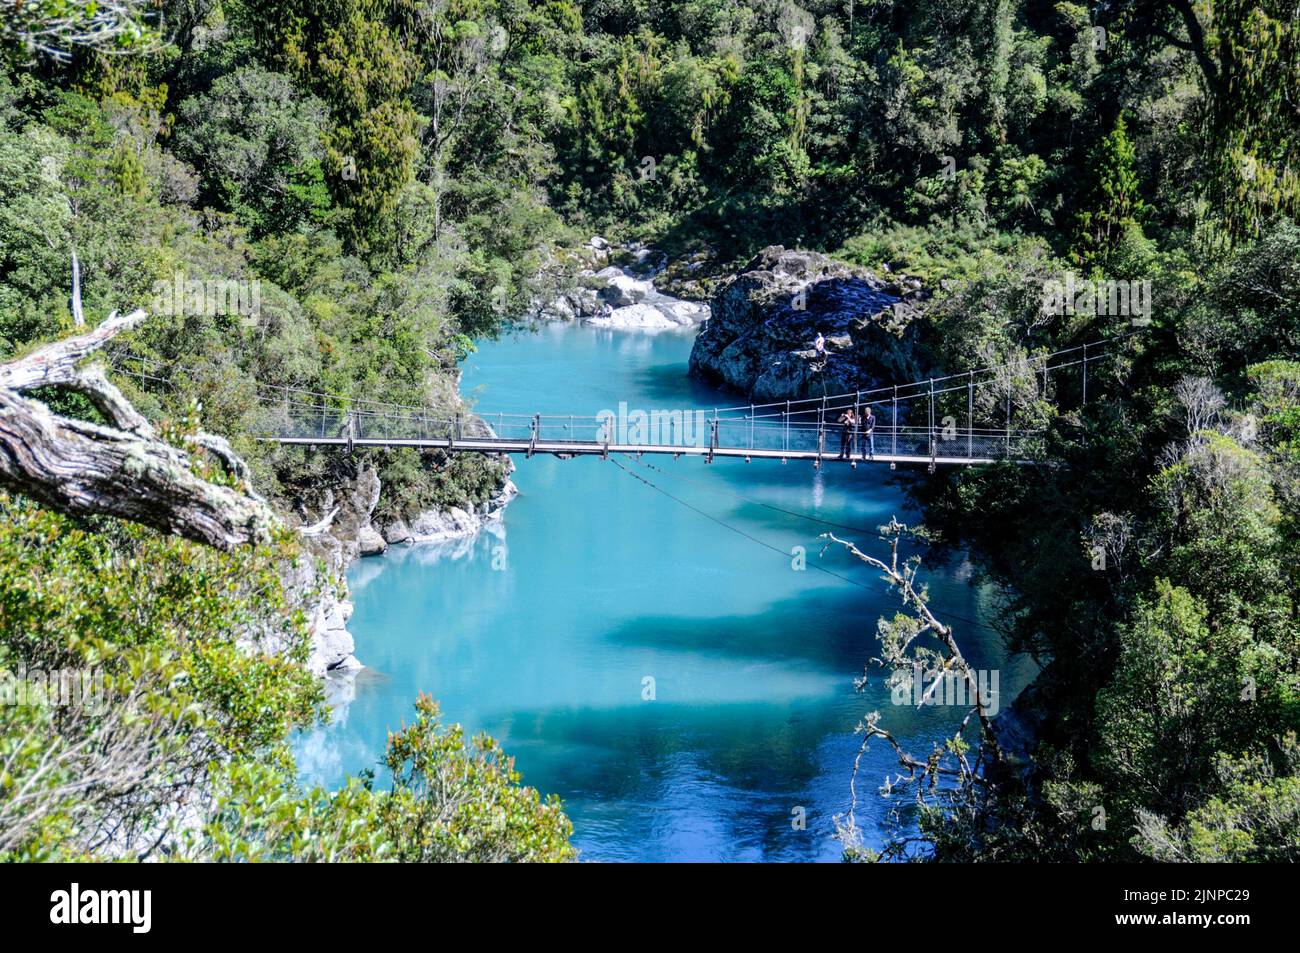 A foot swing bridge across the natural  turquoise blue water at Hokitika Gorge on the west coast of South Island in New Zealand Stock Photo